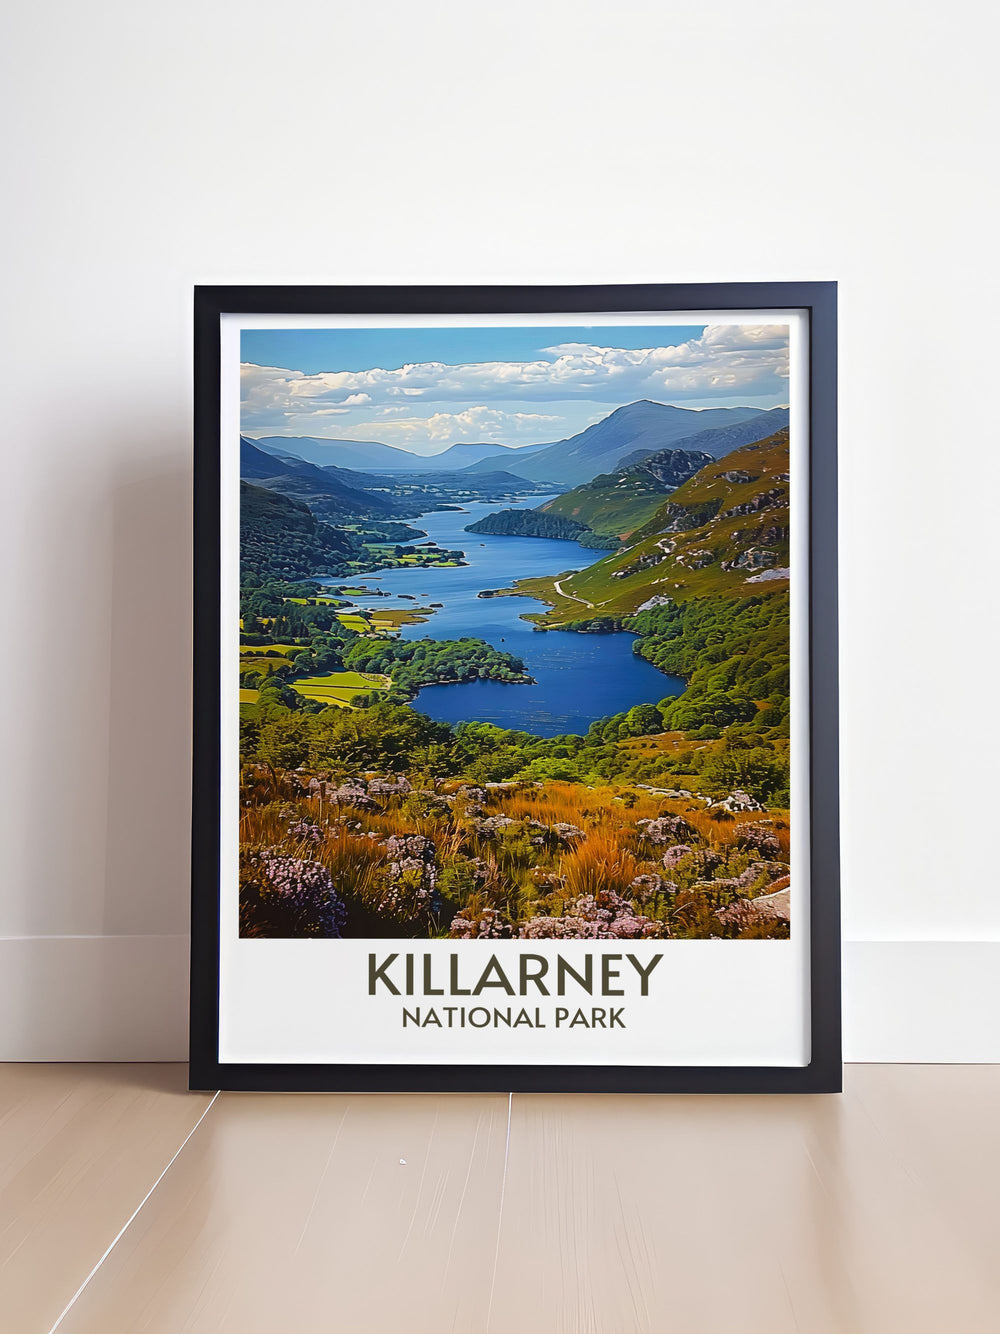 Home decor featuring the panoramic Ladies View in Killarney, ideal for those seeking a tranquil setting in their living space